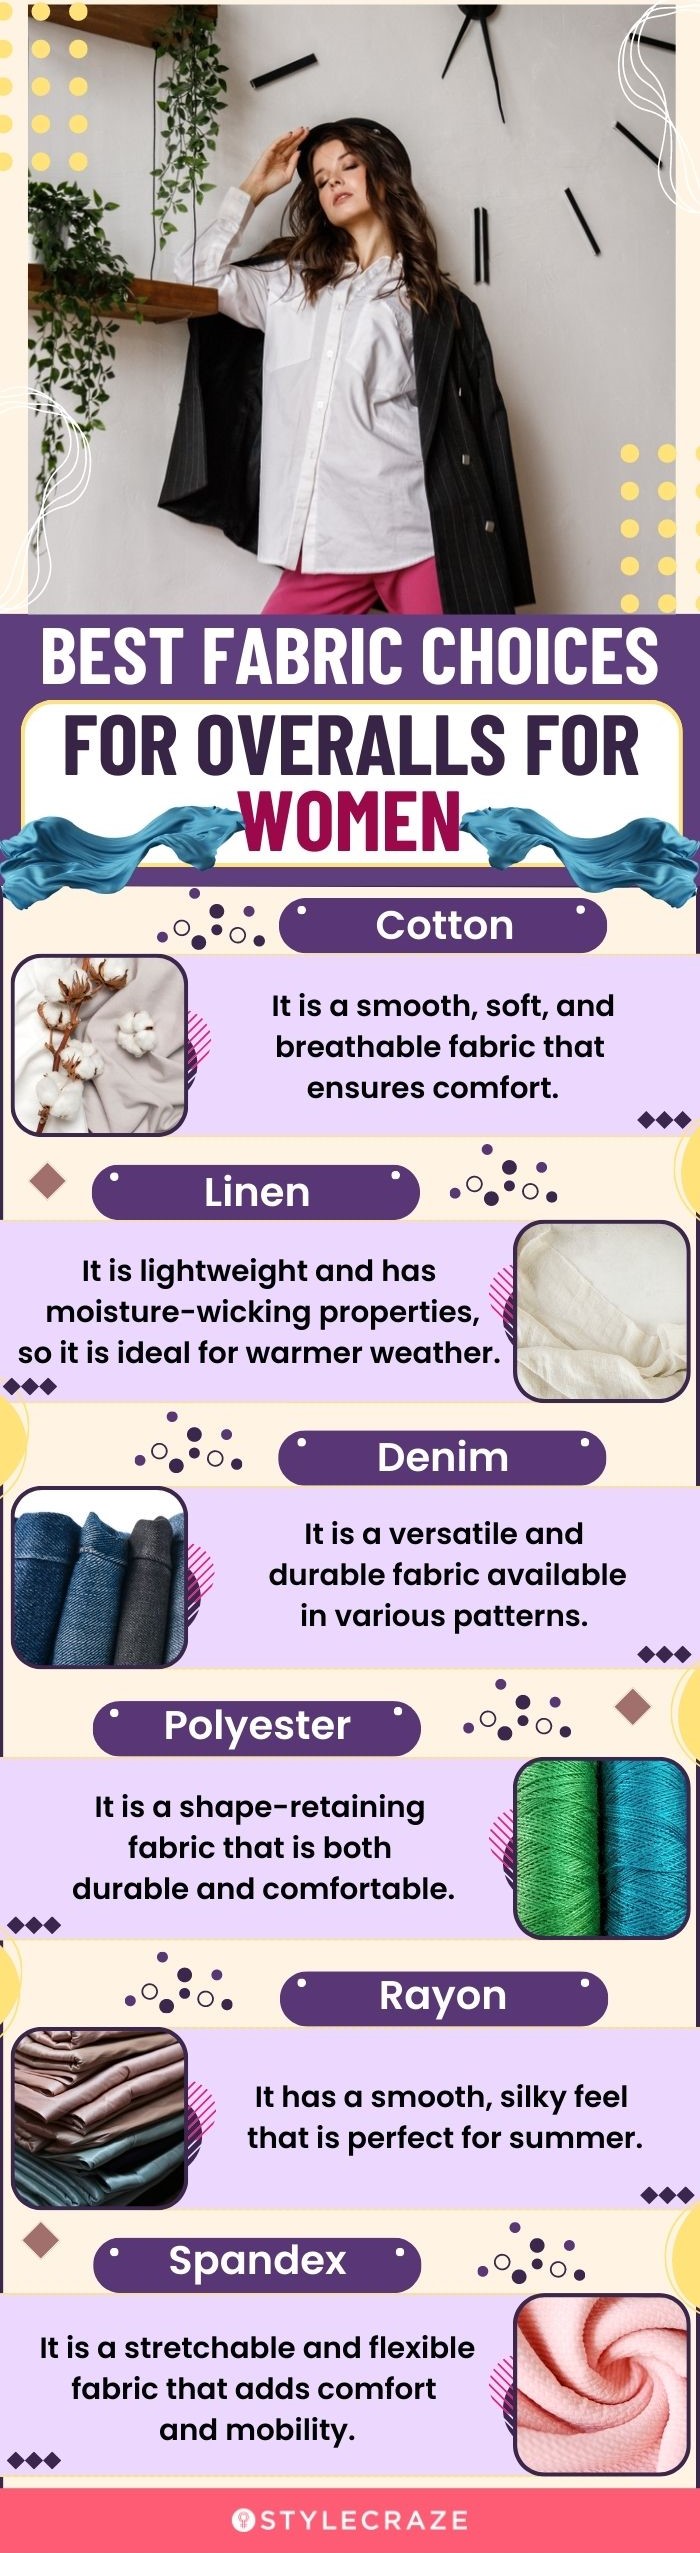 Best Fabric Choices For Overalls For Women (infographic)